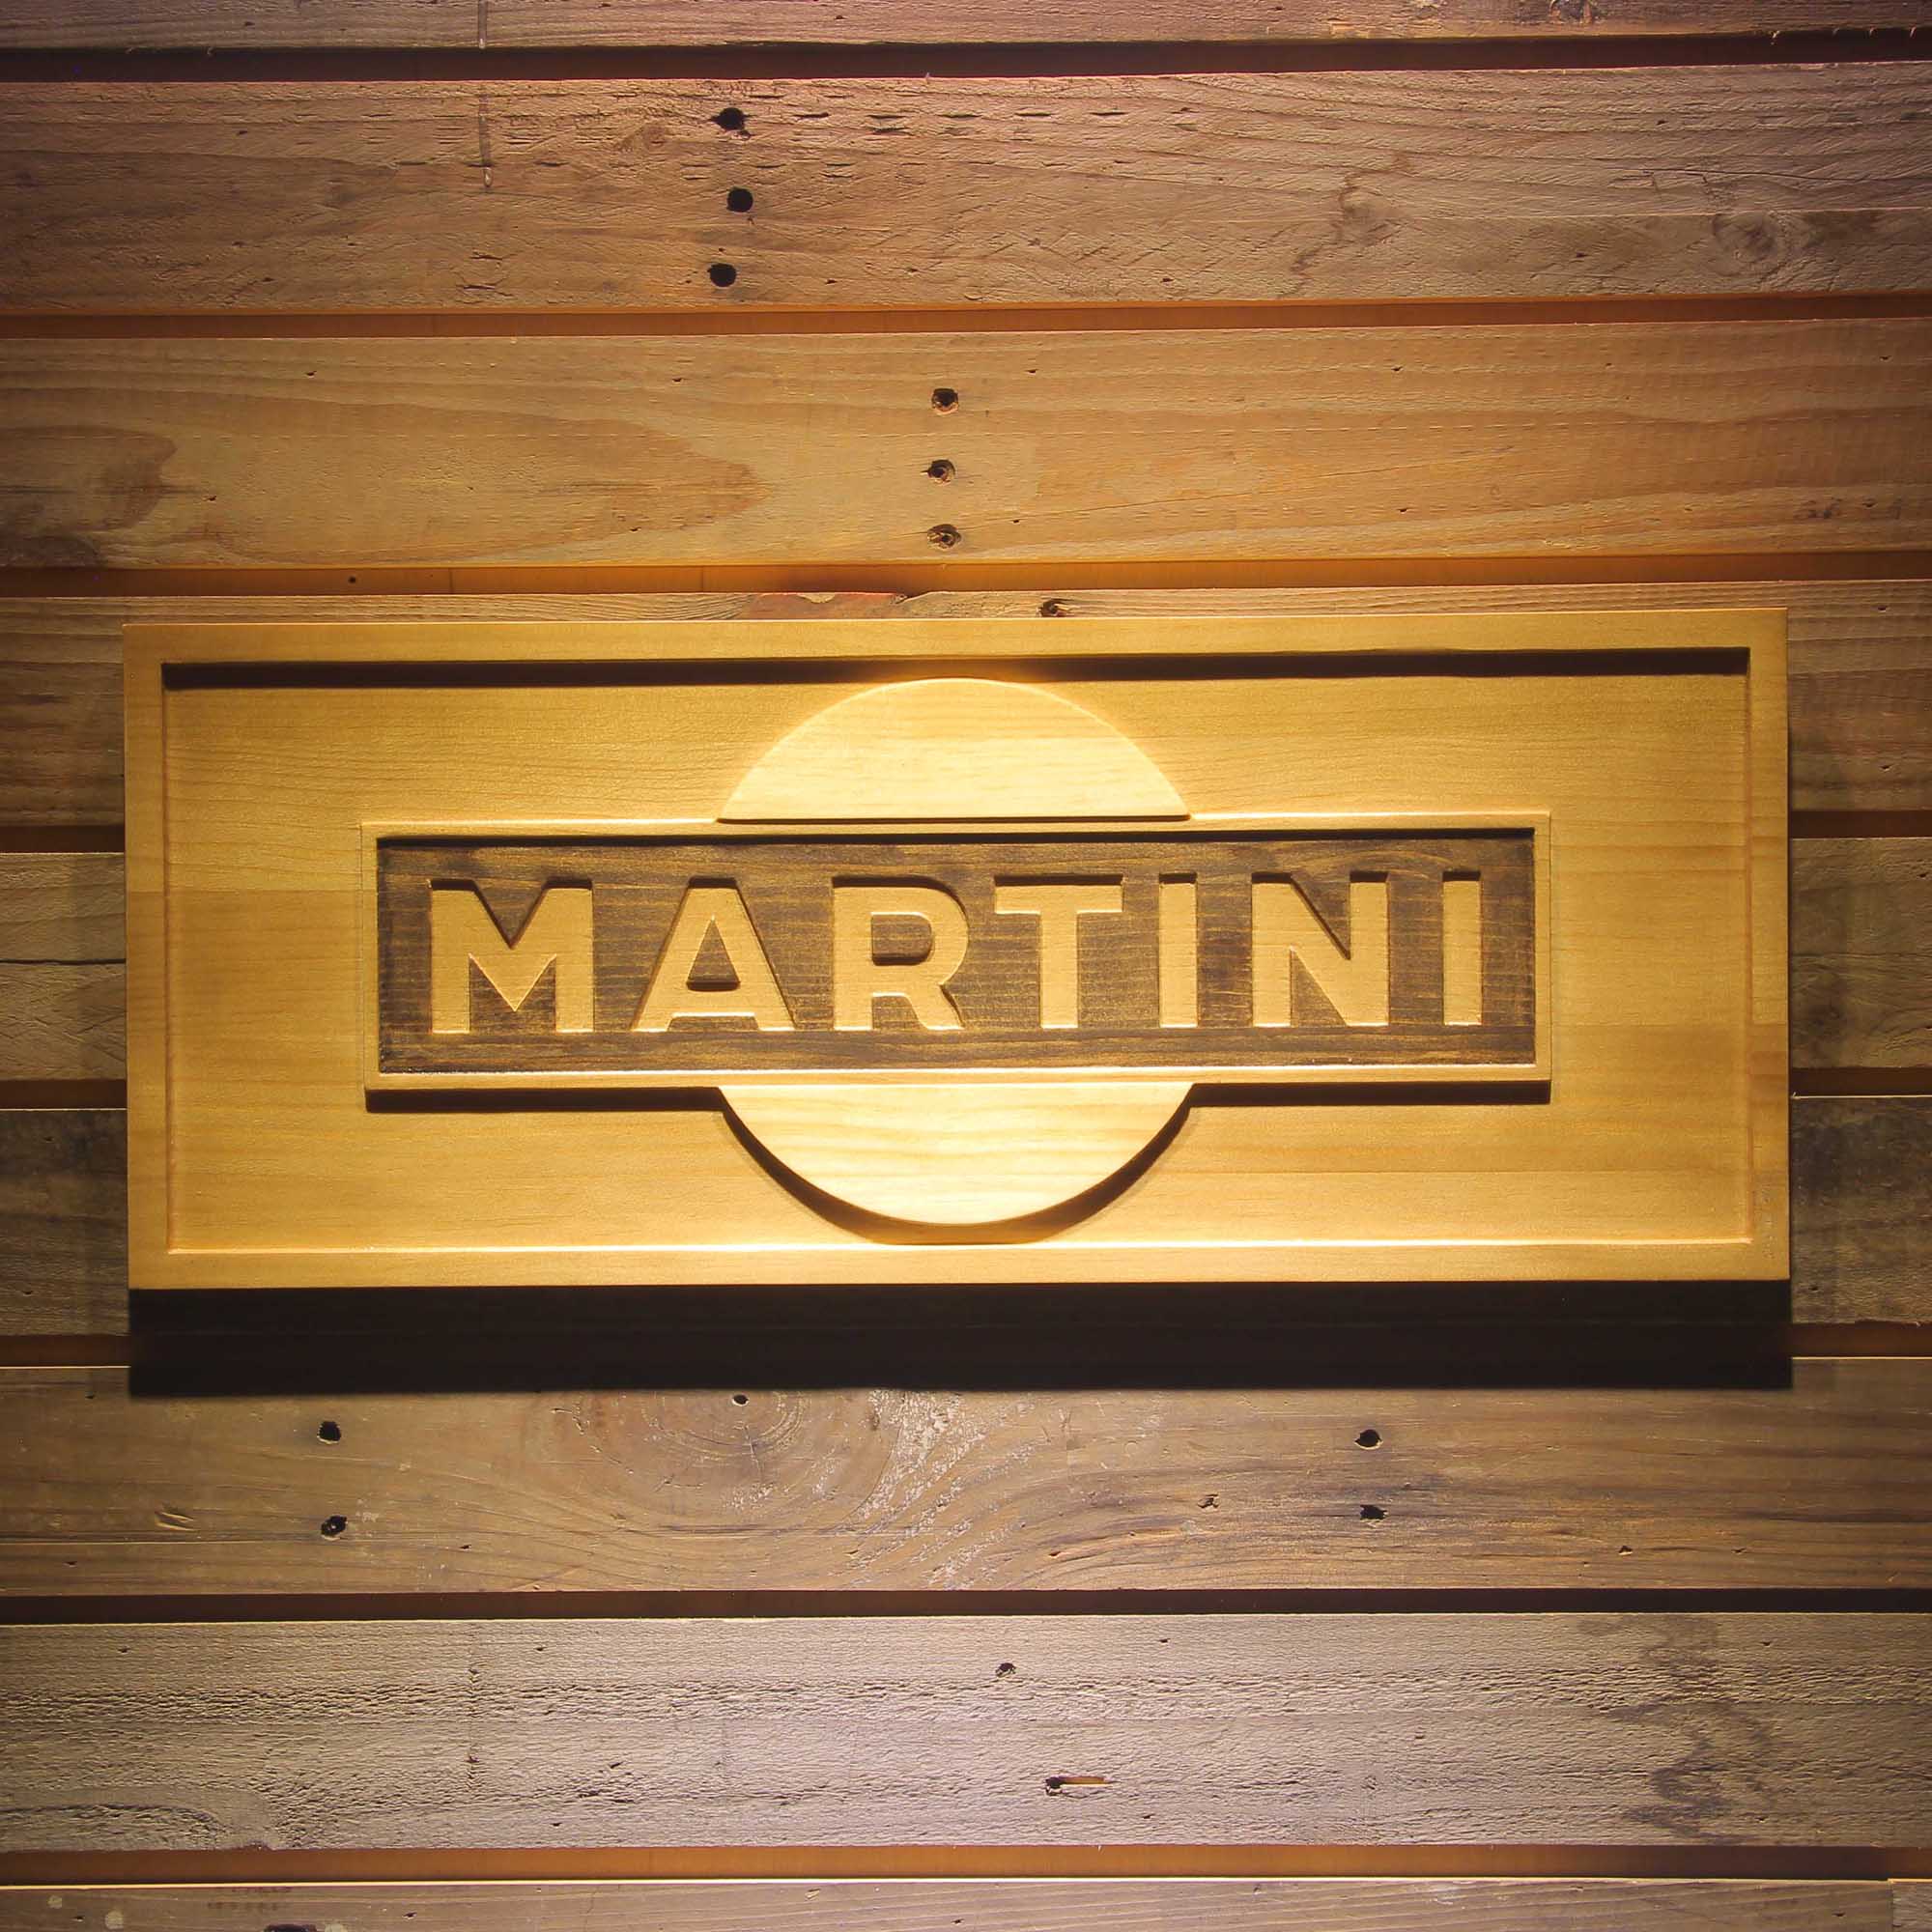 Martini Wine 3D Solid Wooden Craving Sign